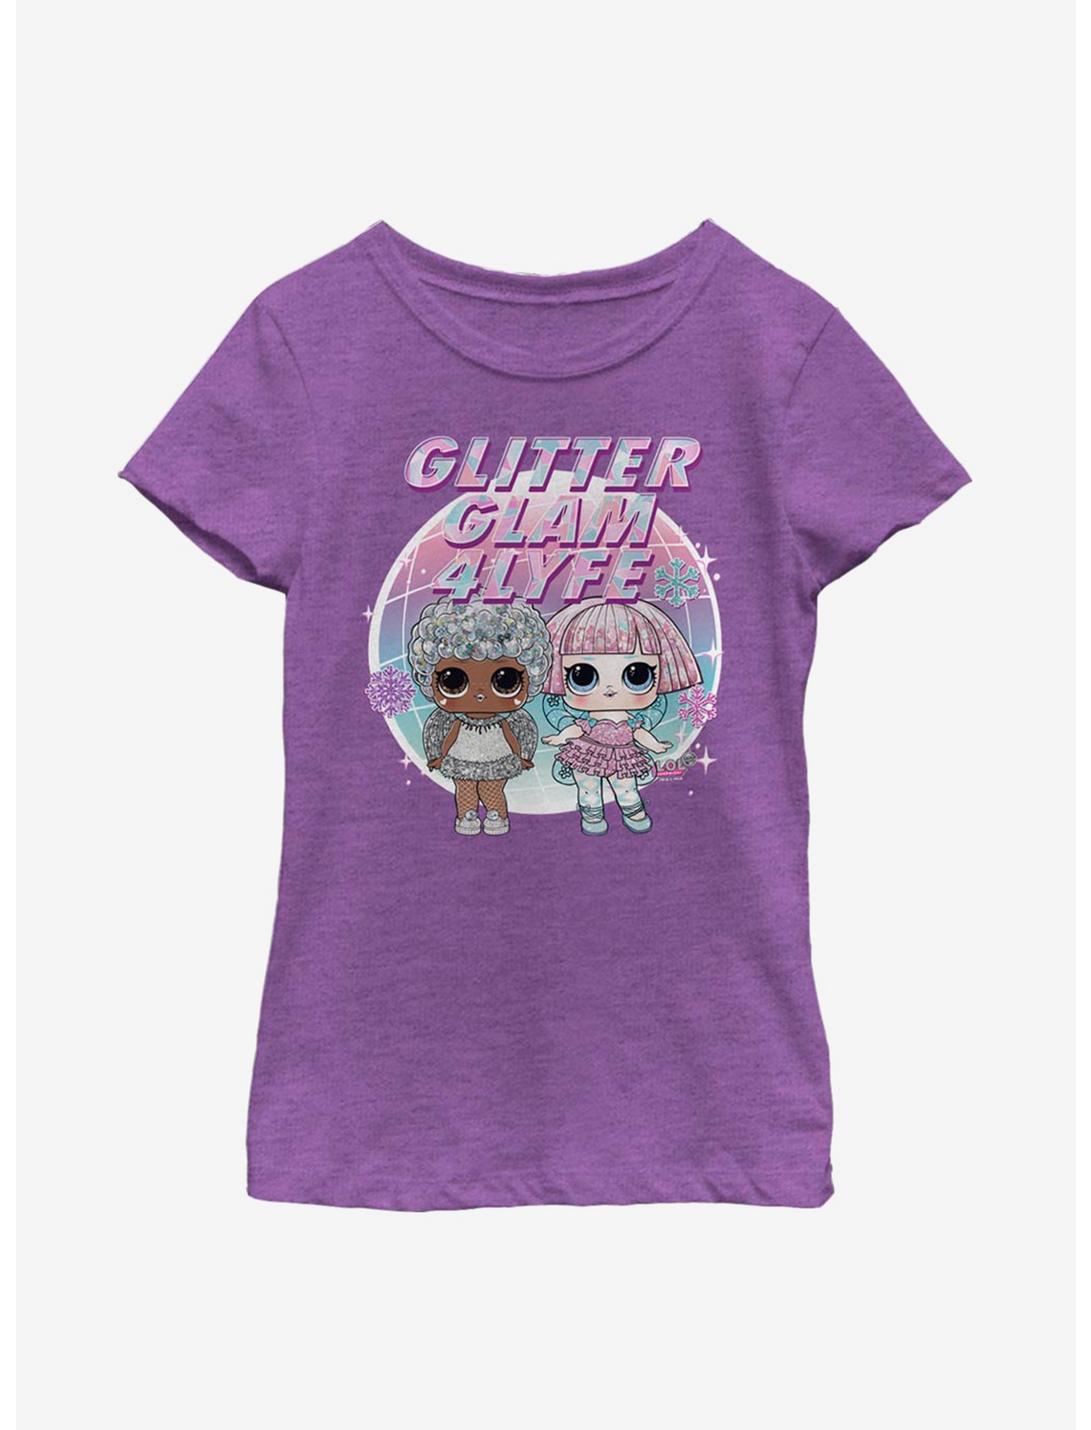 L.O.L. Surprise! Glitter Glam Youth Girls T-Shirt, PURPLE BERRY, hi-res